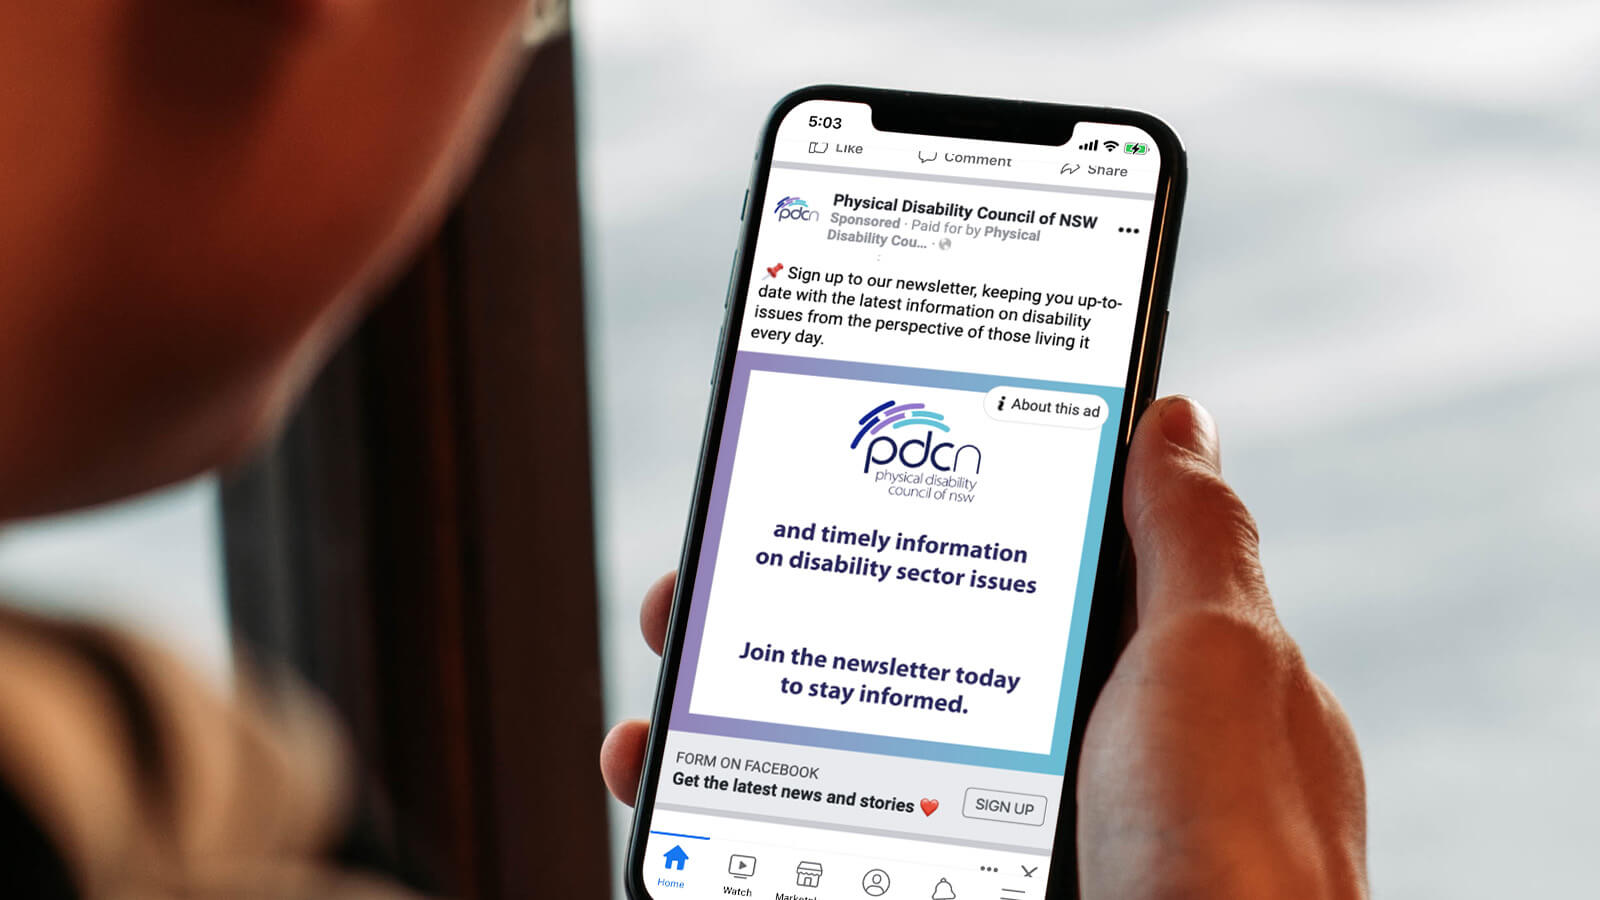 Physical Disability Council of NSW | Physical Disability Council of NSW advert shown on a smartphone | Devotion